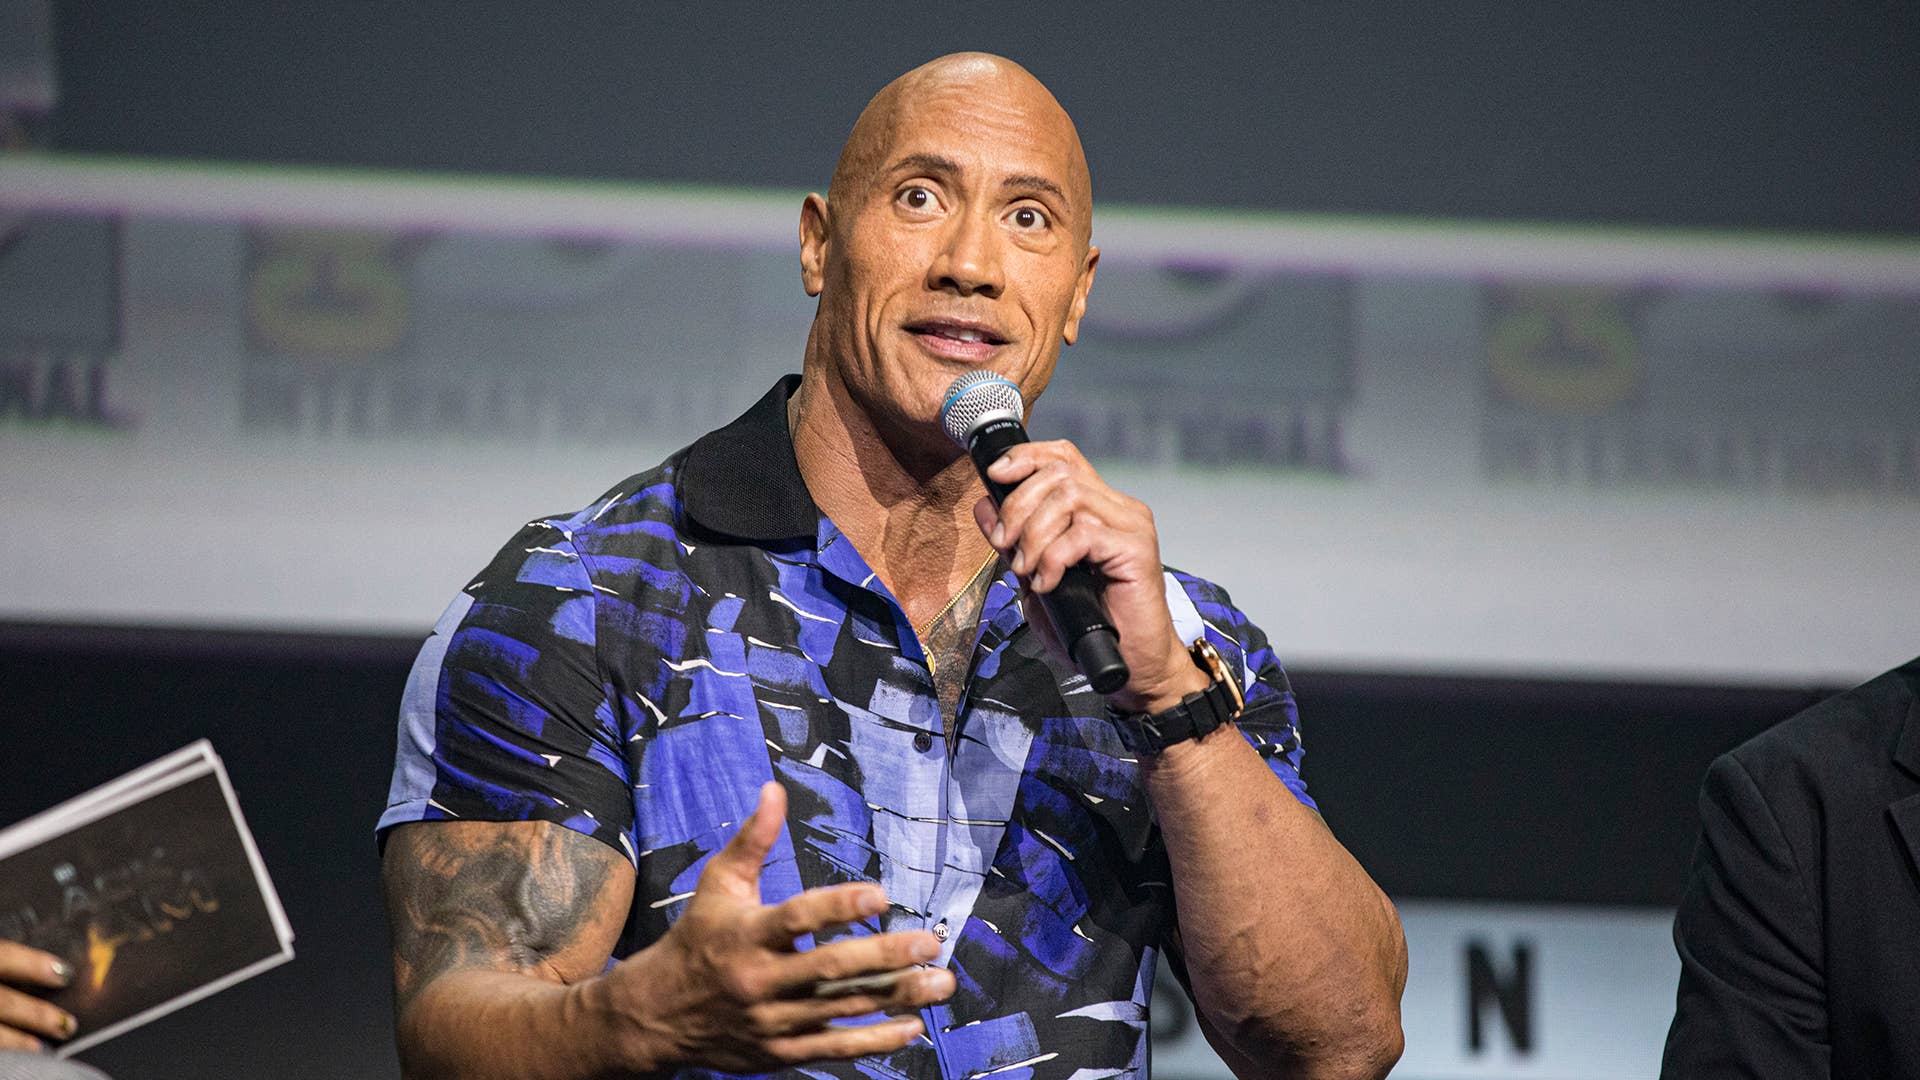 Actor Dwayne "The Rock" Johnson appears at the Warner Brothers panel comic con 2022